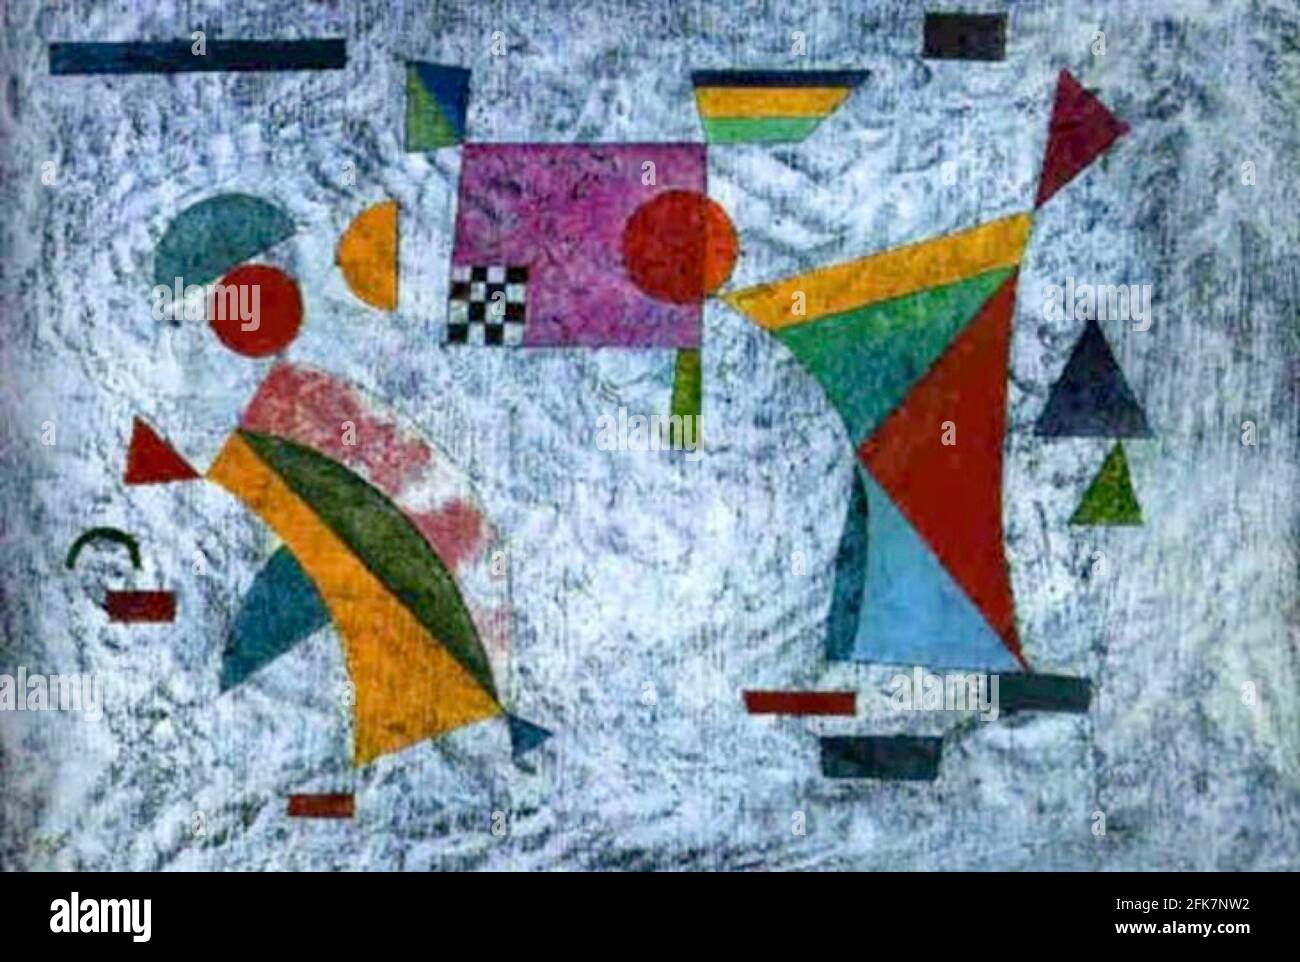 Kandinsky artwork showing two figures on ice playing curling perhaps. Skating away on the thin ice of a new day. They might be. Stock Photo